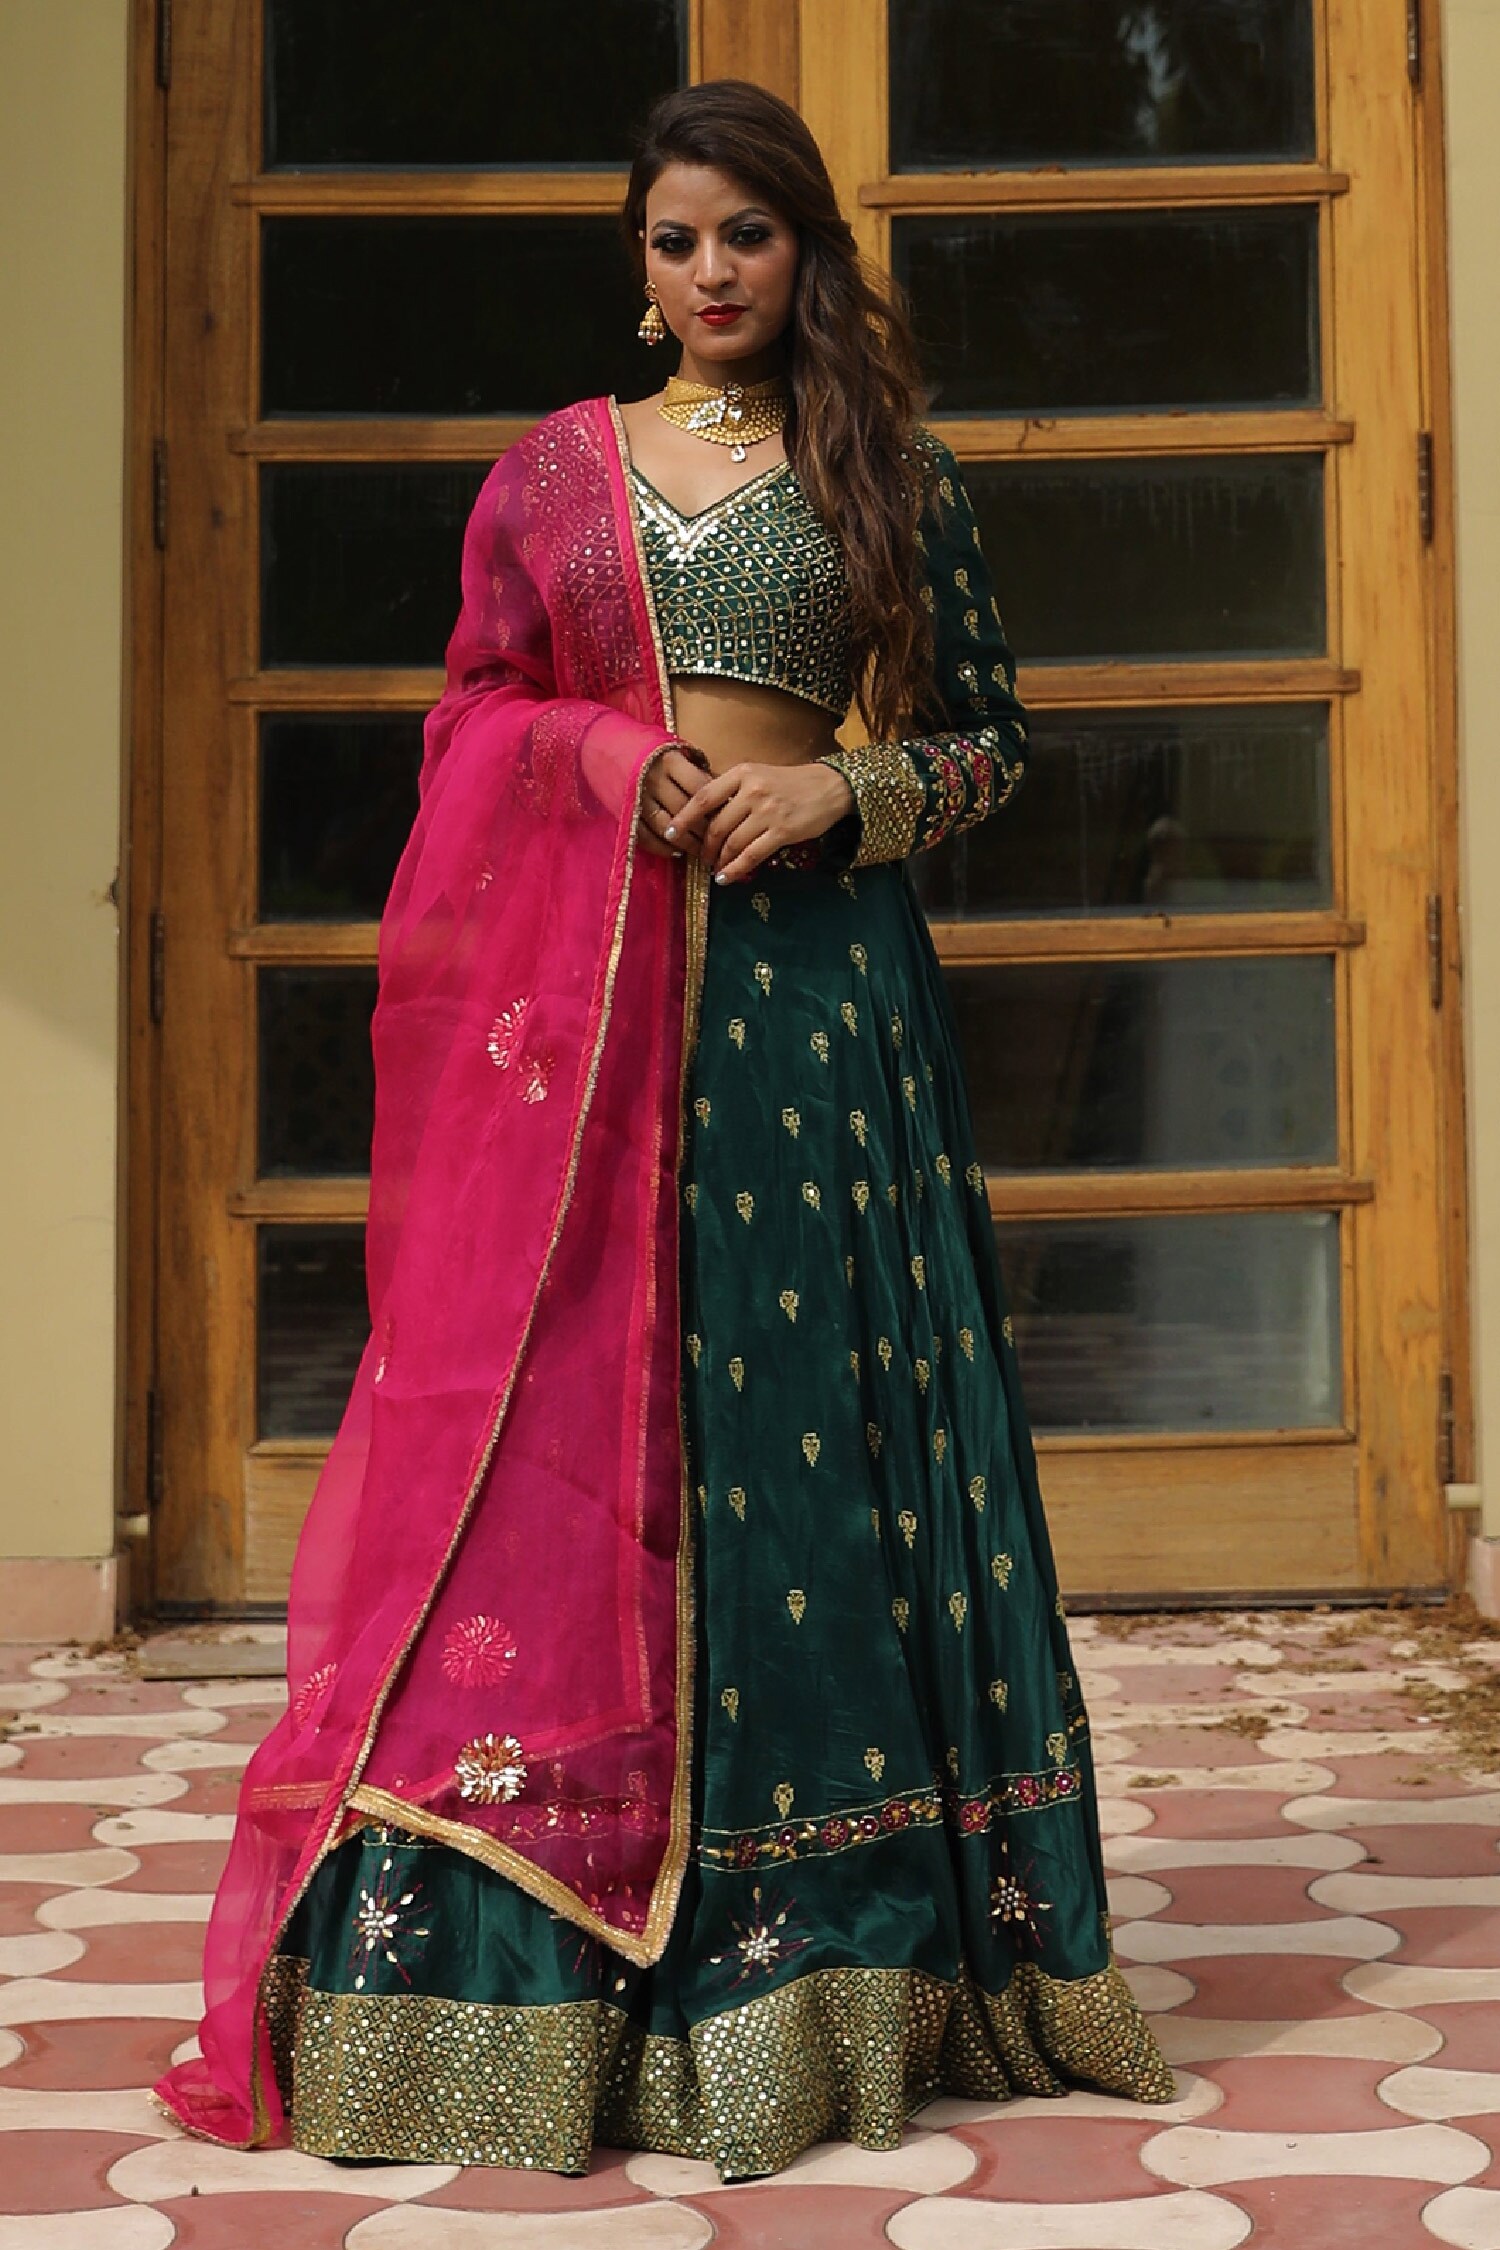 Buy Bottle Green and red georgette wedding lehenga in UK, USA and Canada